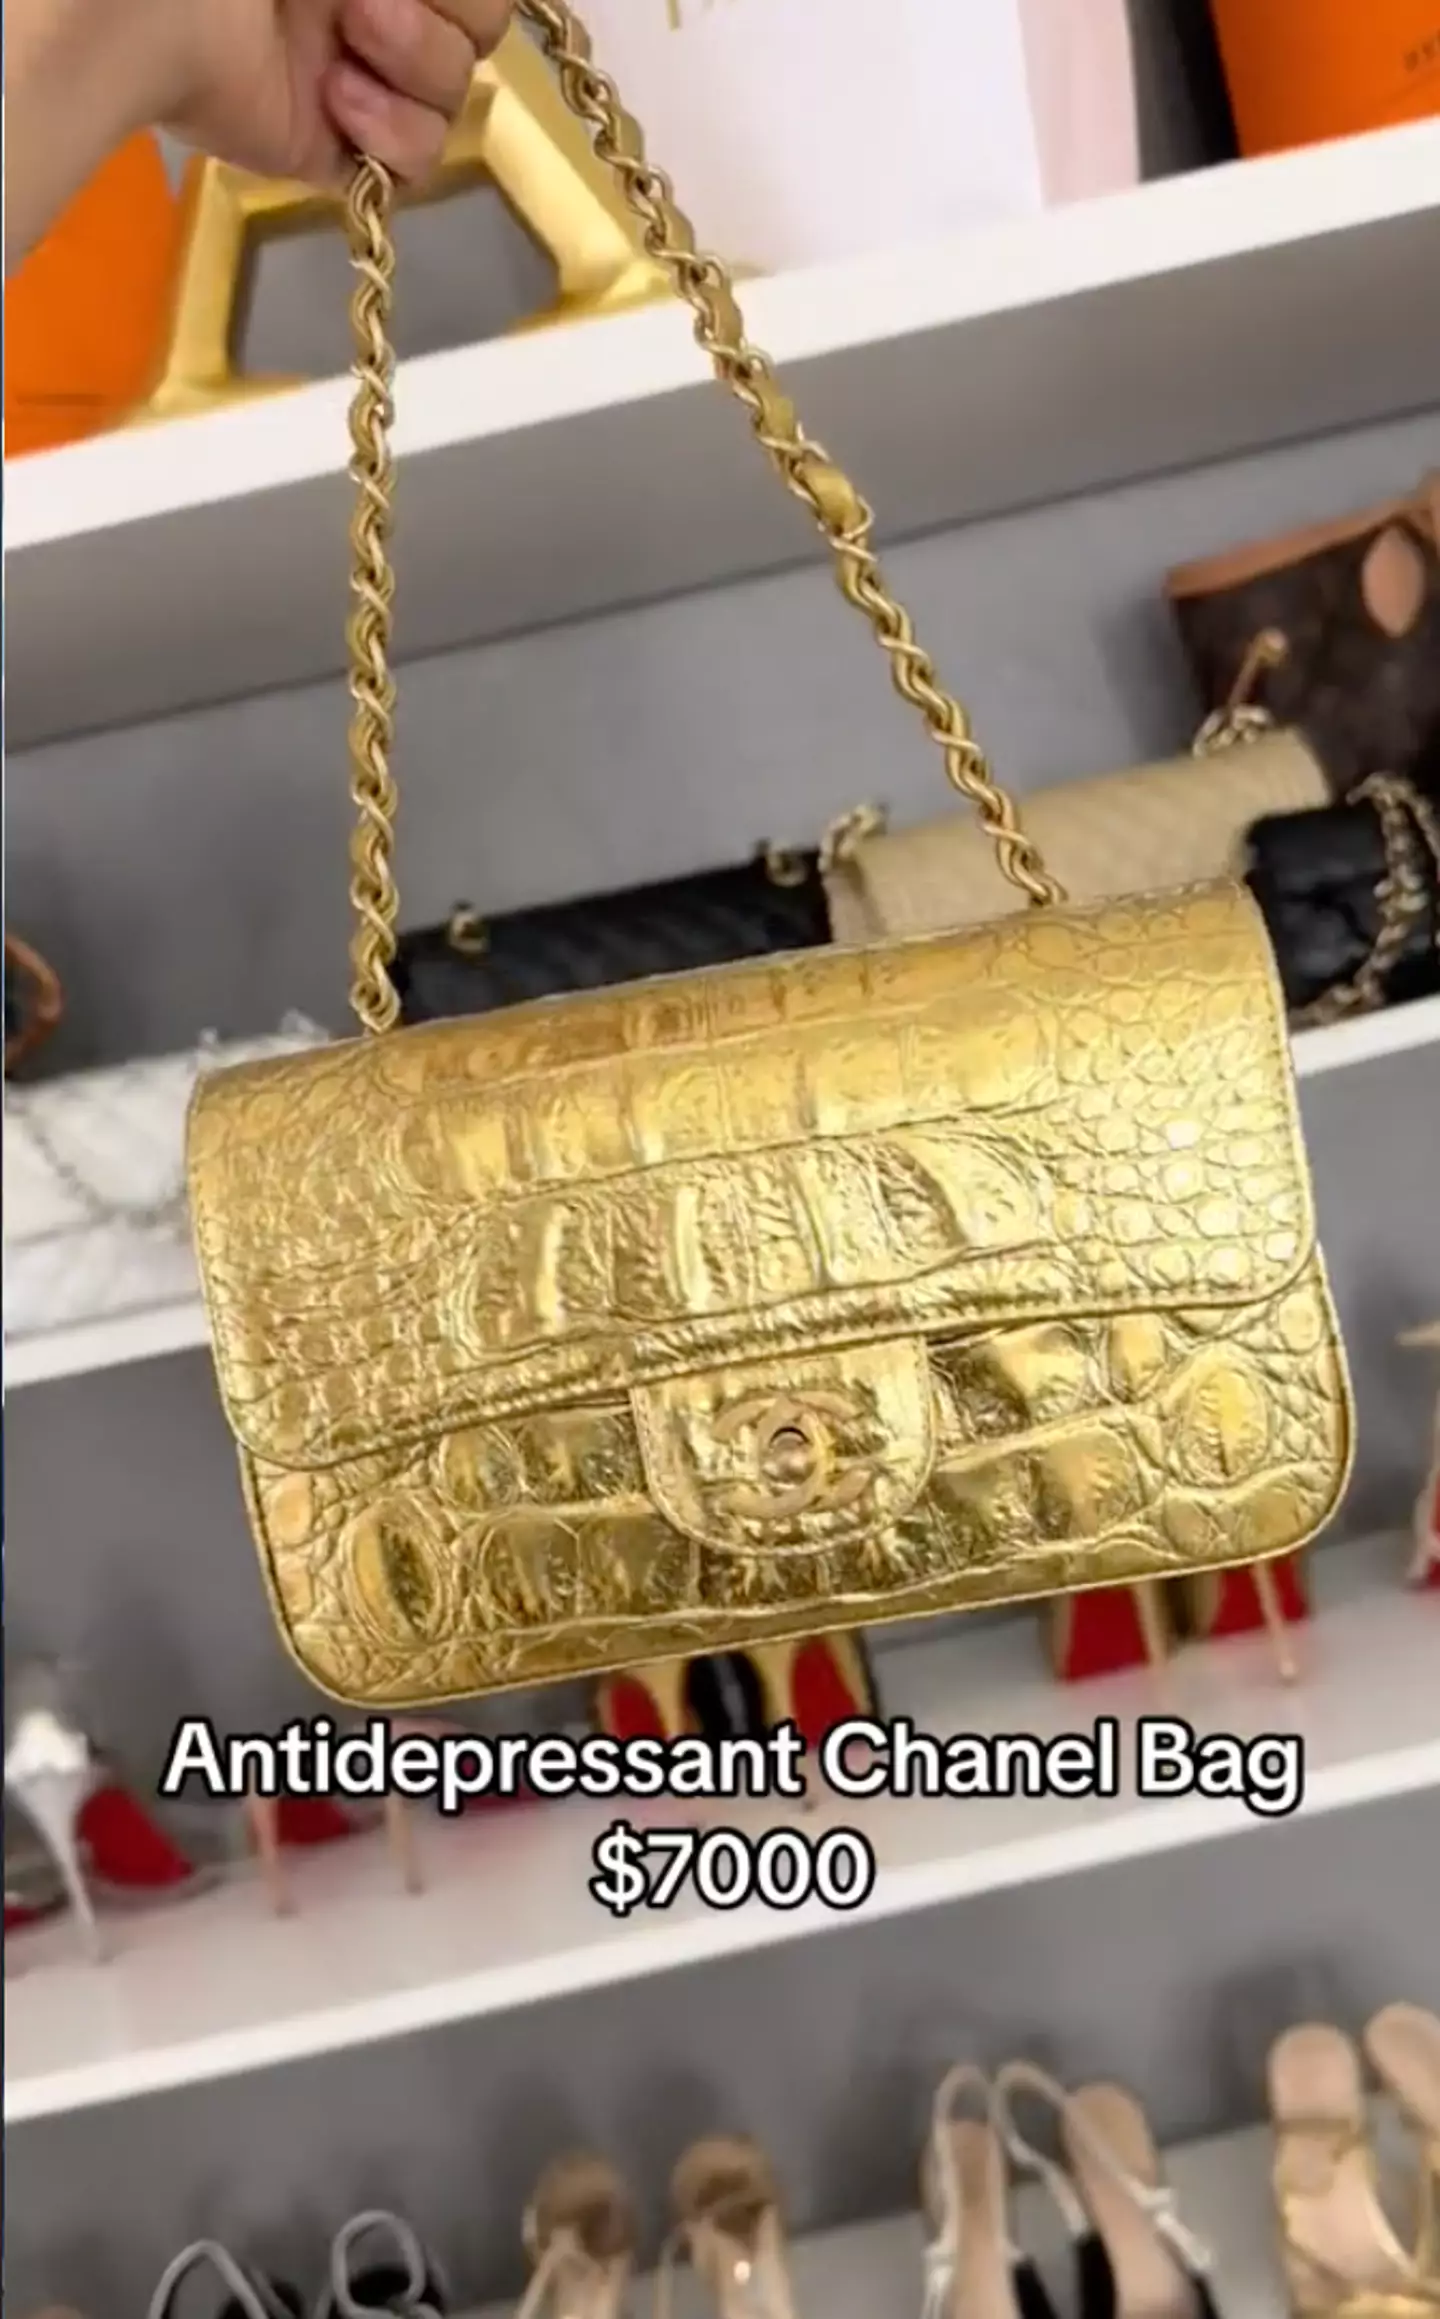 Linda ended up buying two Chanel bags in this video.